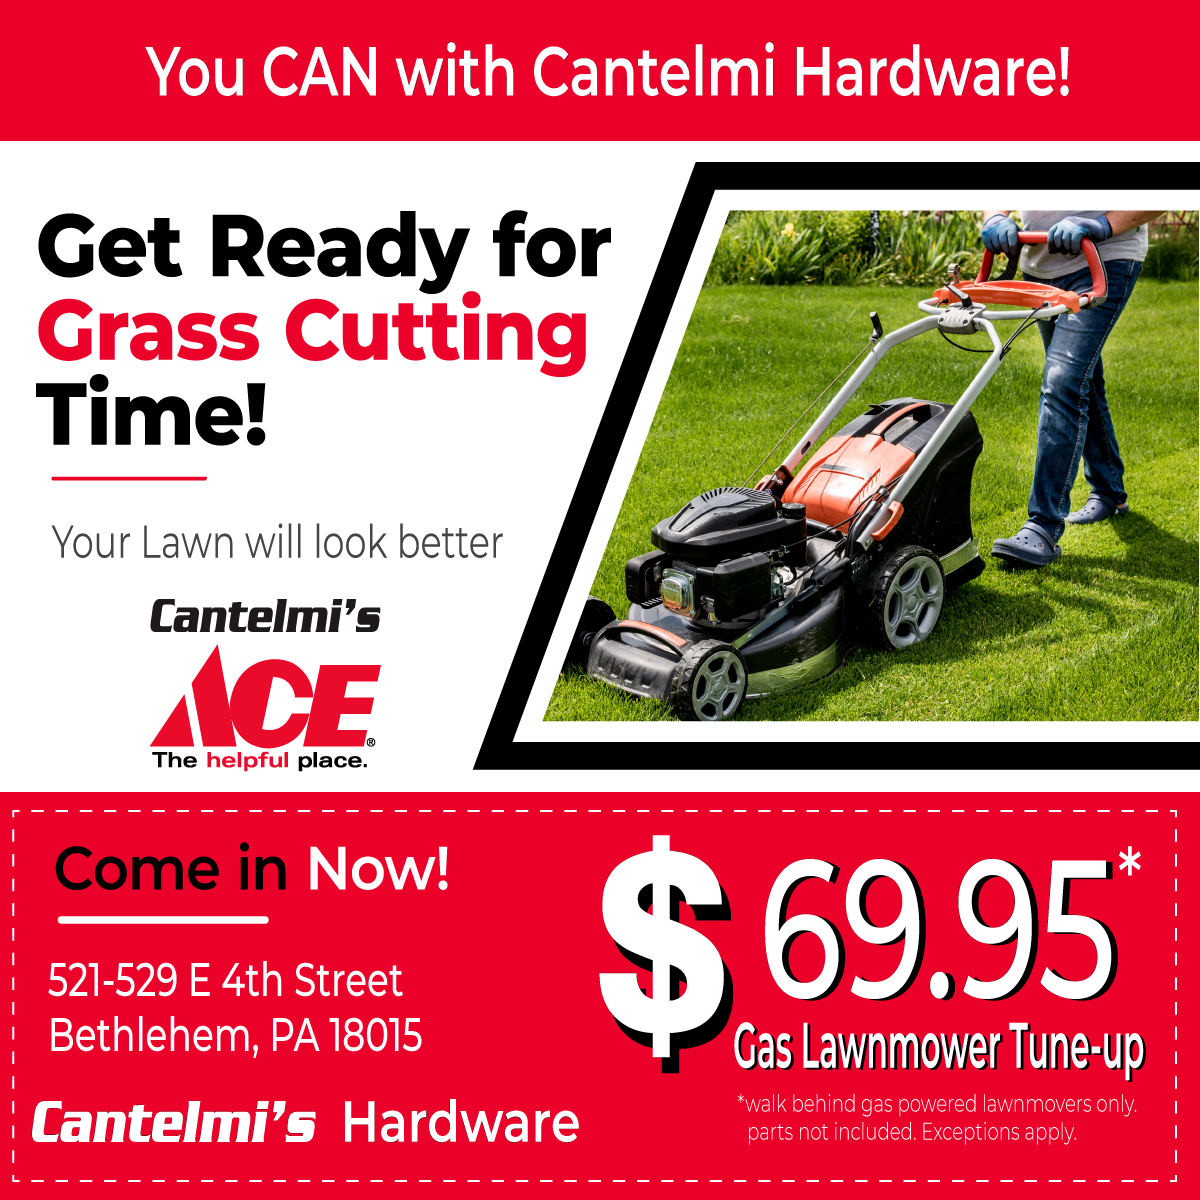 Cantelmi Hardware Bethlehem PA Lawnmower tune up special